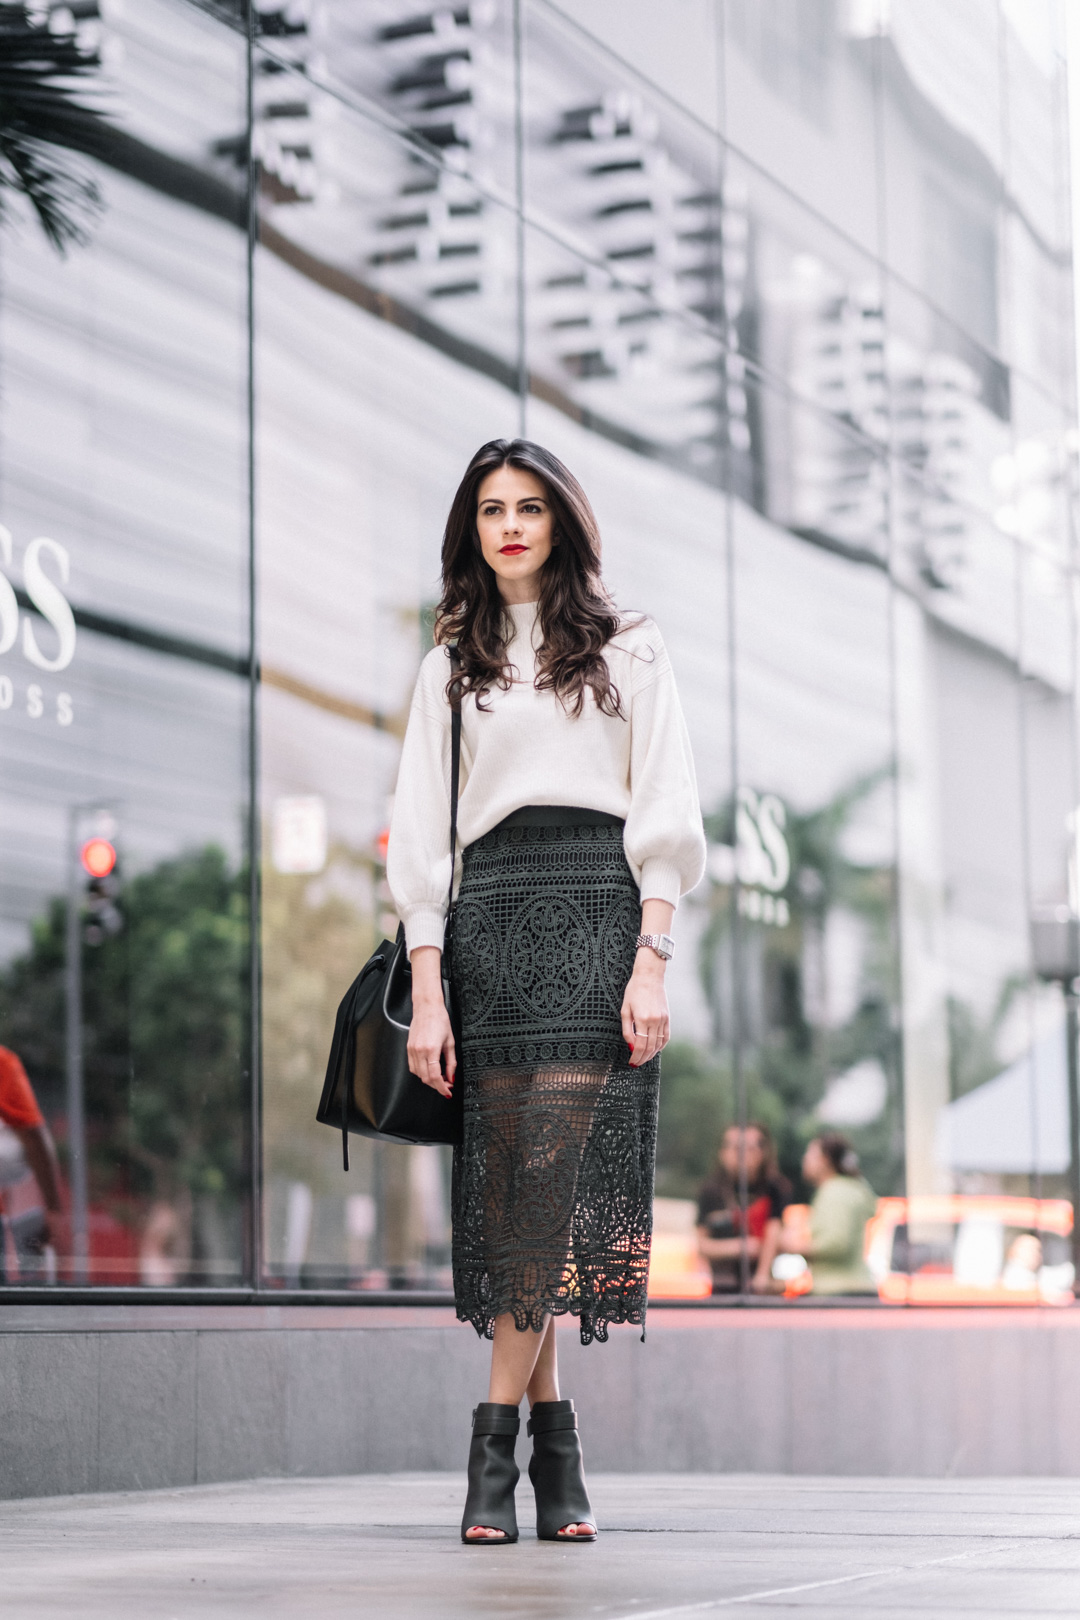 Jackie Roque styling a Topshop Lace skirt, Mansur Gavriel Bucket bag and Vince shoes